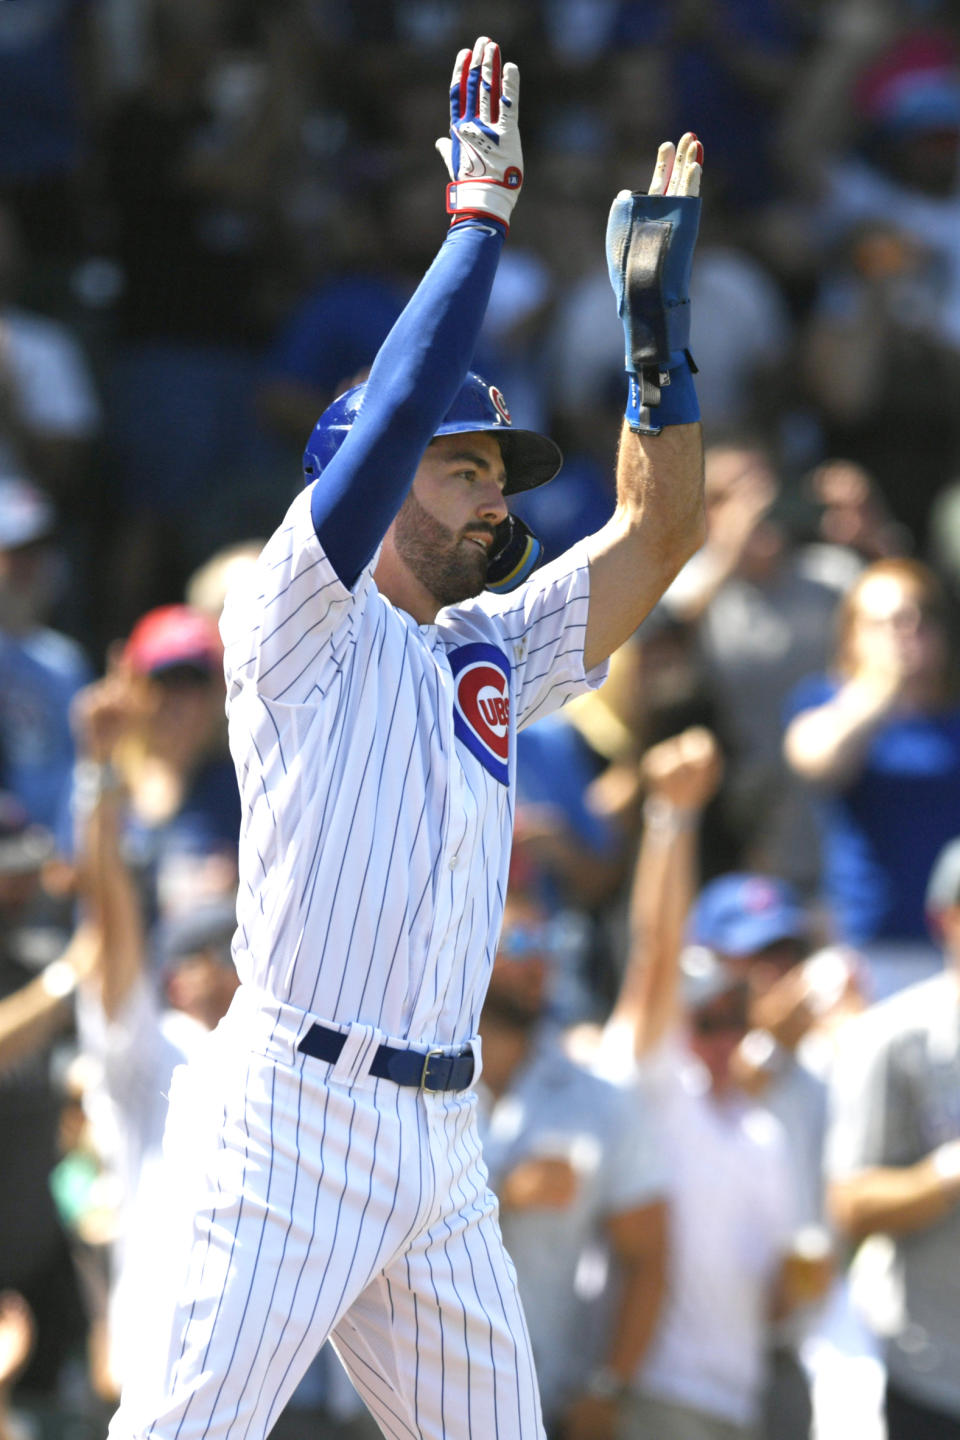 Chicago Cubs' Dansby Swanson (7) celebrates at home plate after scoring on a 3-RBI double hit by teammate Seika Suzuki during the first inning of a baseball game against the San Francisco Giants Wednesday, Sept. 6, 2023, in Chicago. (AP Photo/Paul Beaty)